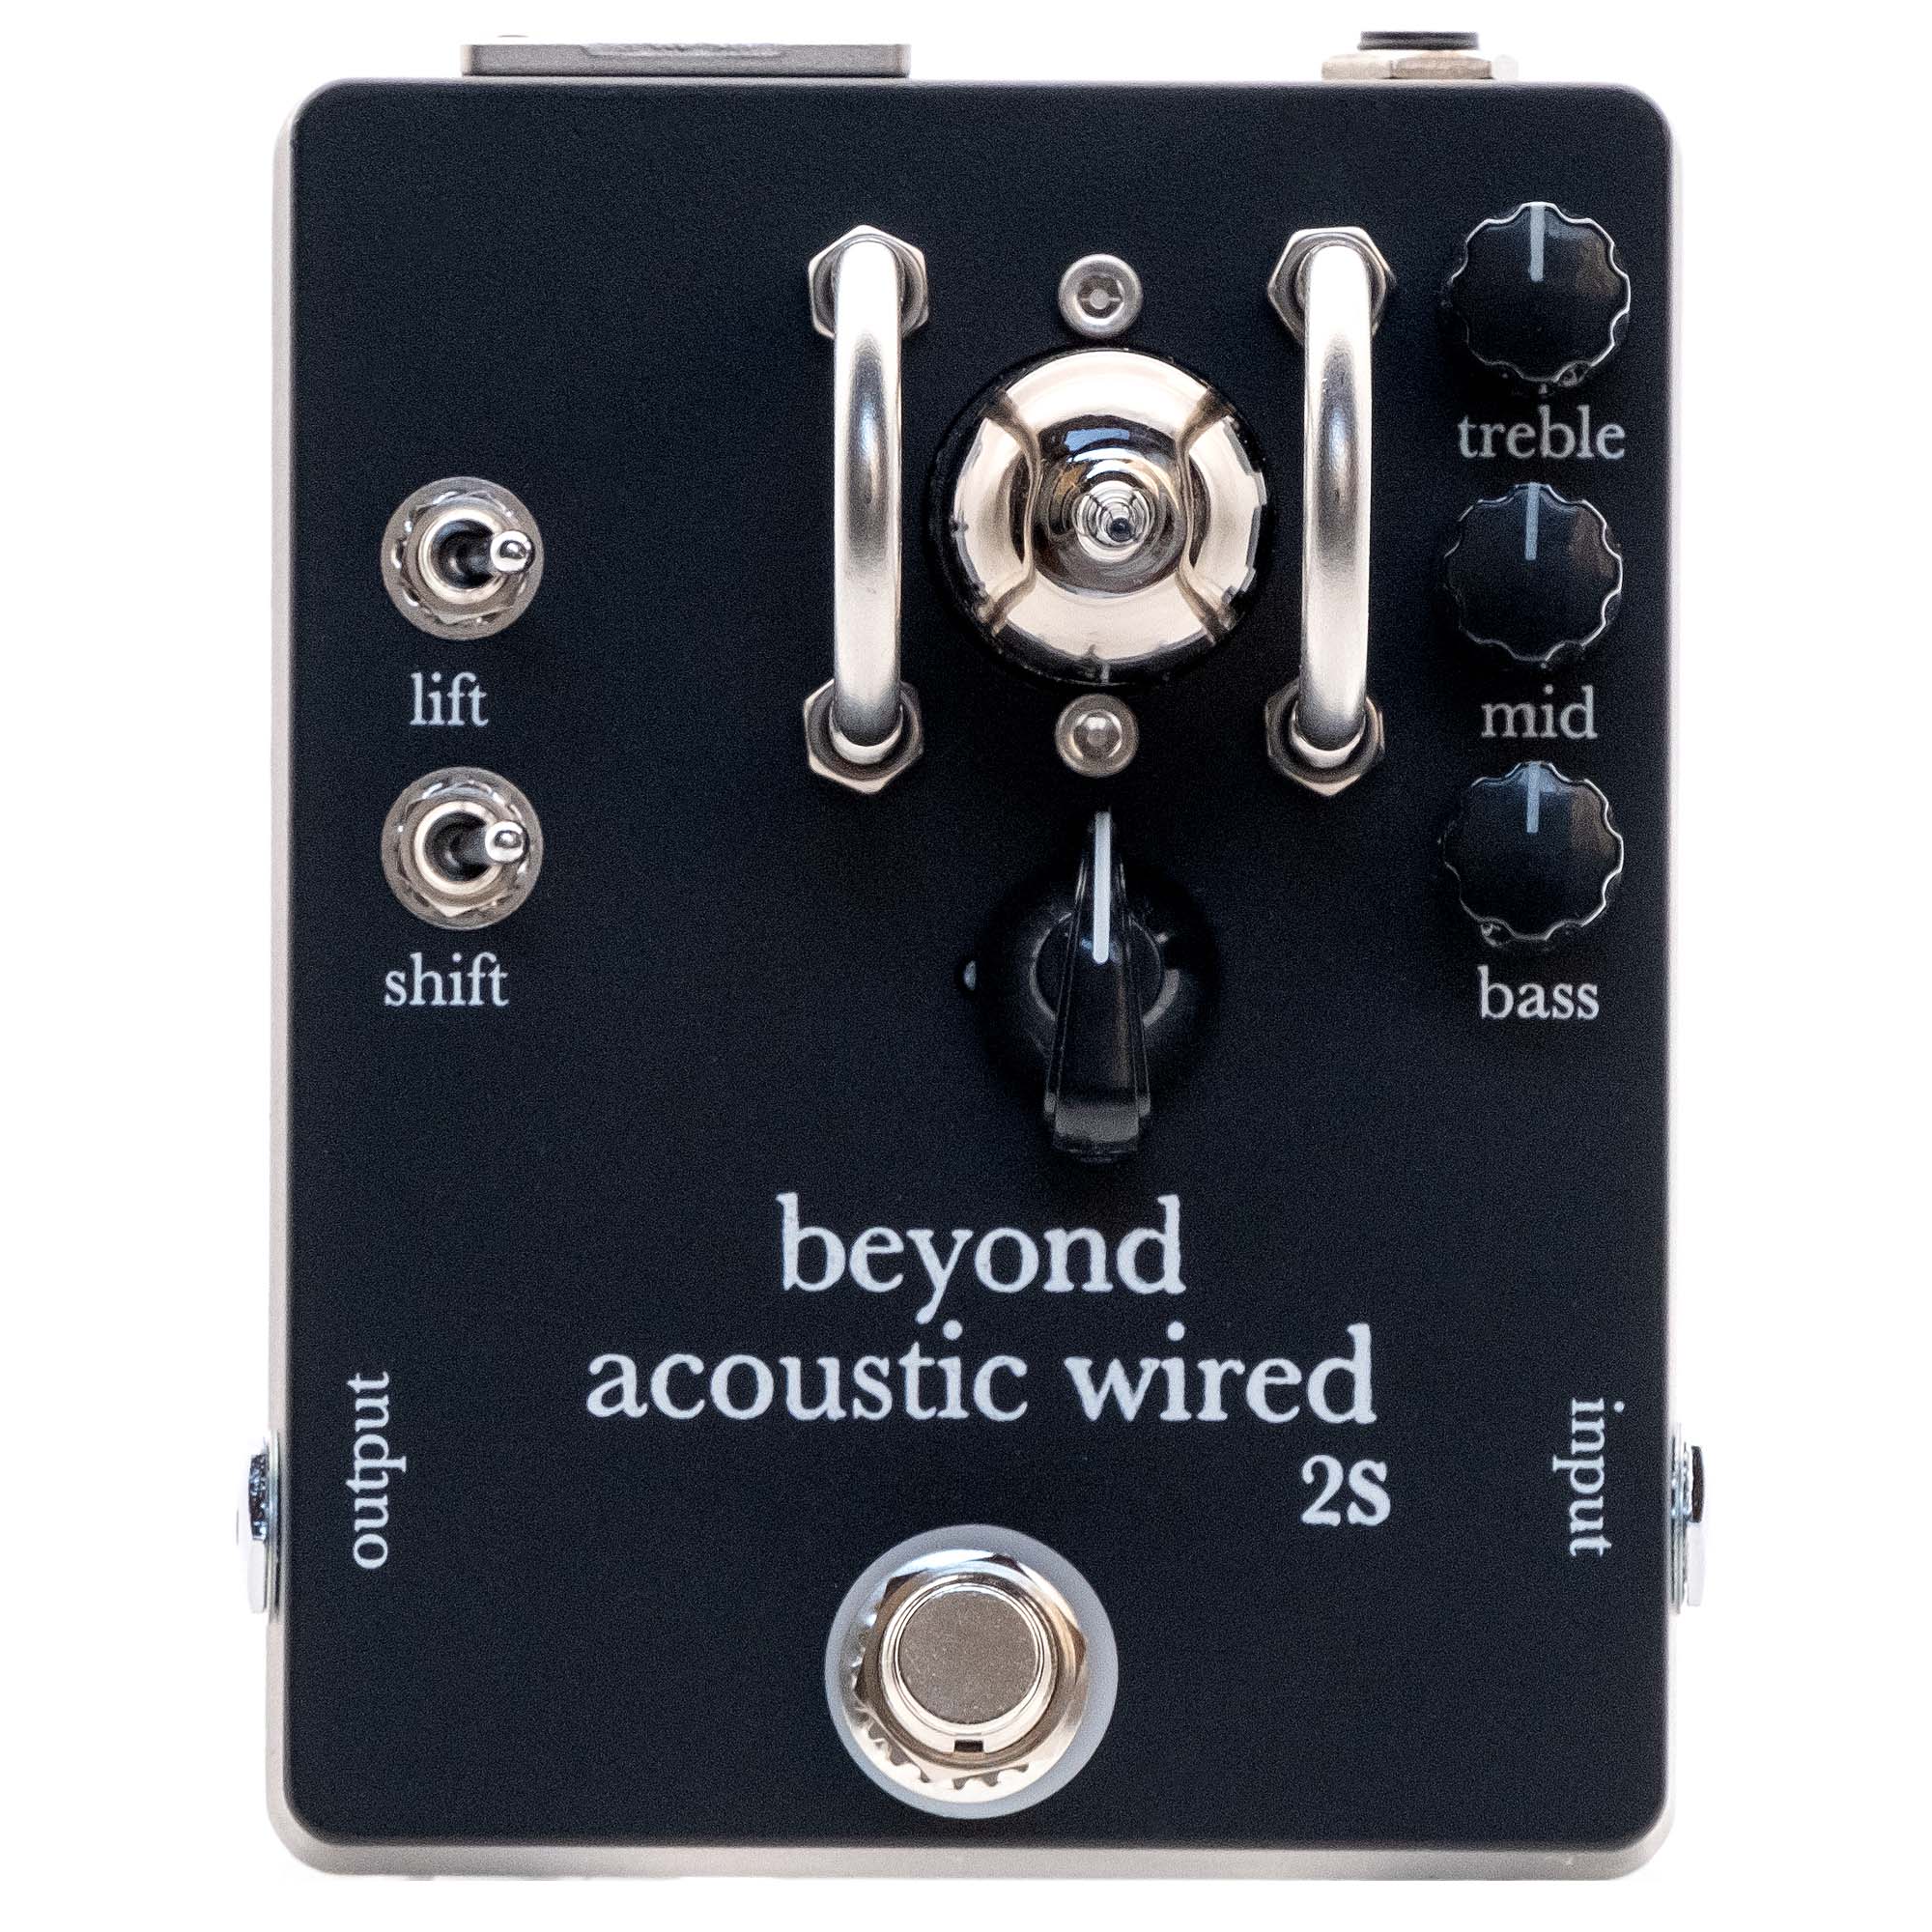 【ESP直営店】【お取り寄せ商品】beyond tube pedalsBeyond acoustic wired 2S(真空管エレアコ・プリアンプ／DIボックス)